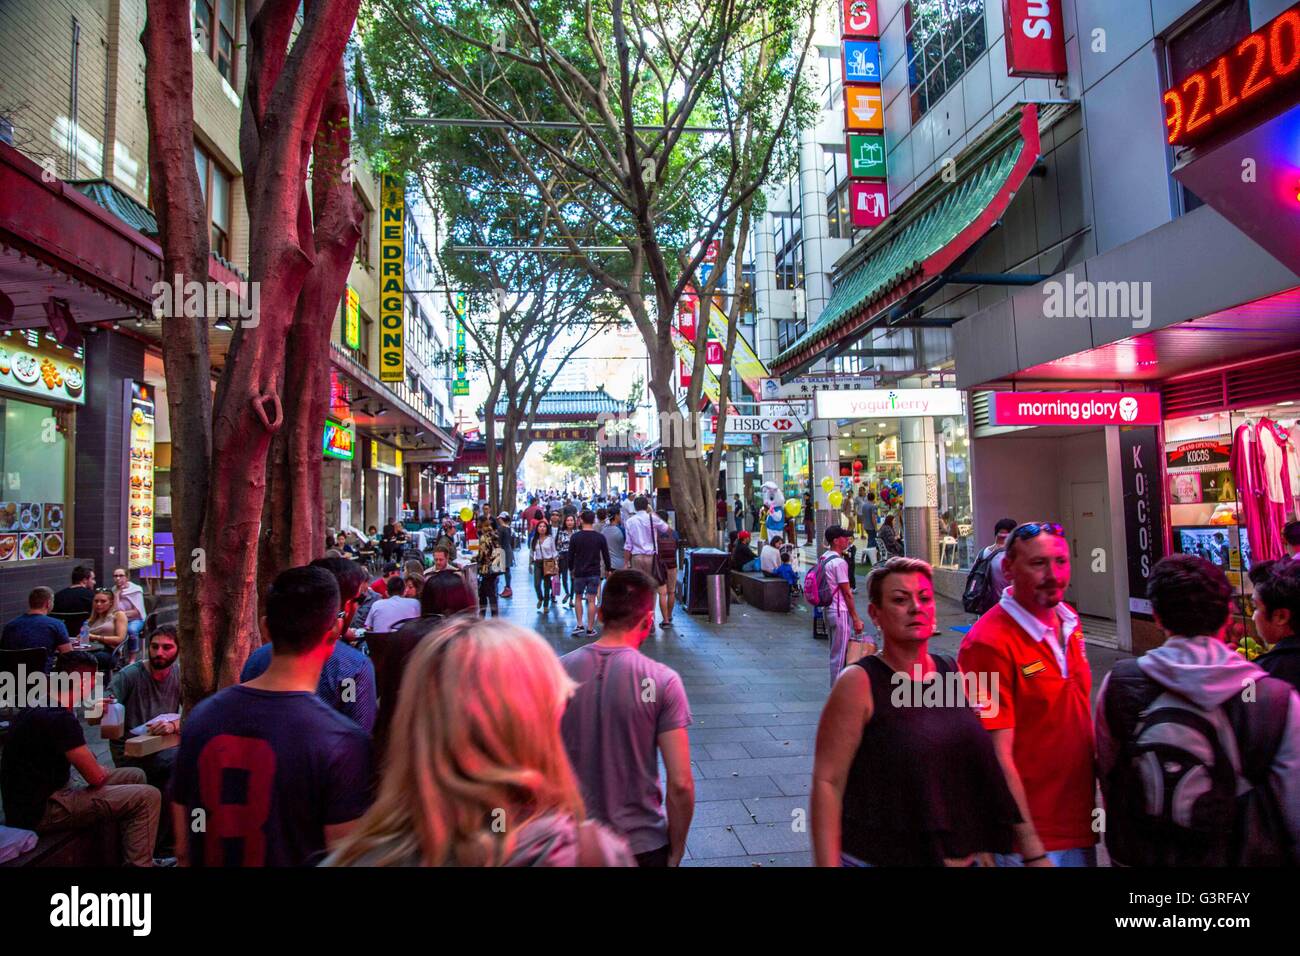 A street scene in the Chinese quarter of Sydney, Australia with many shoppers buying and eating. Stock Photo